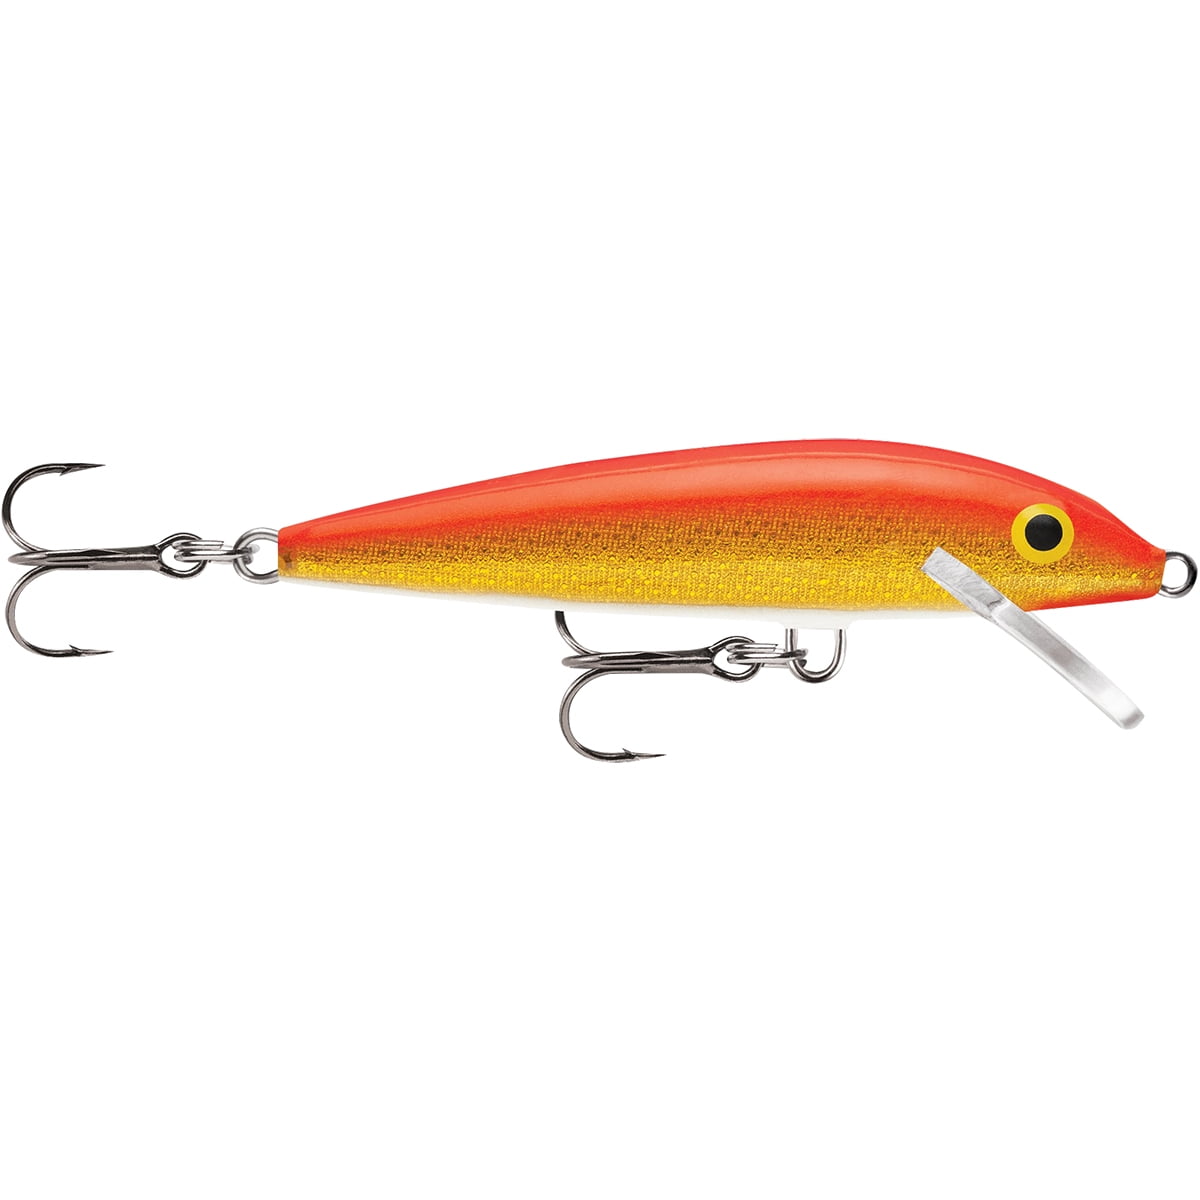 Rapala Original Floating 07 Fishing Lure - Gold Fluorescent Red